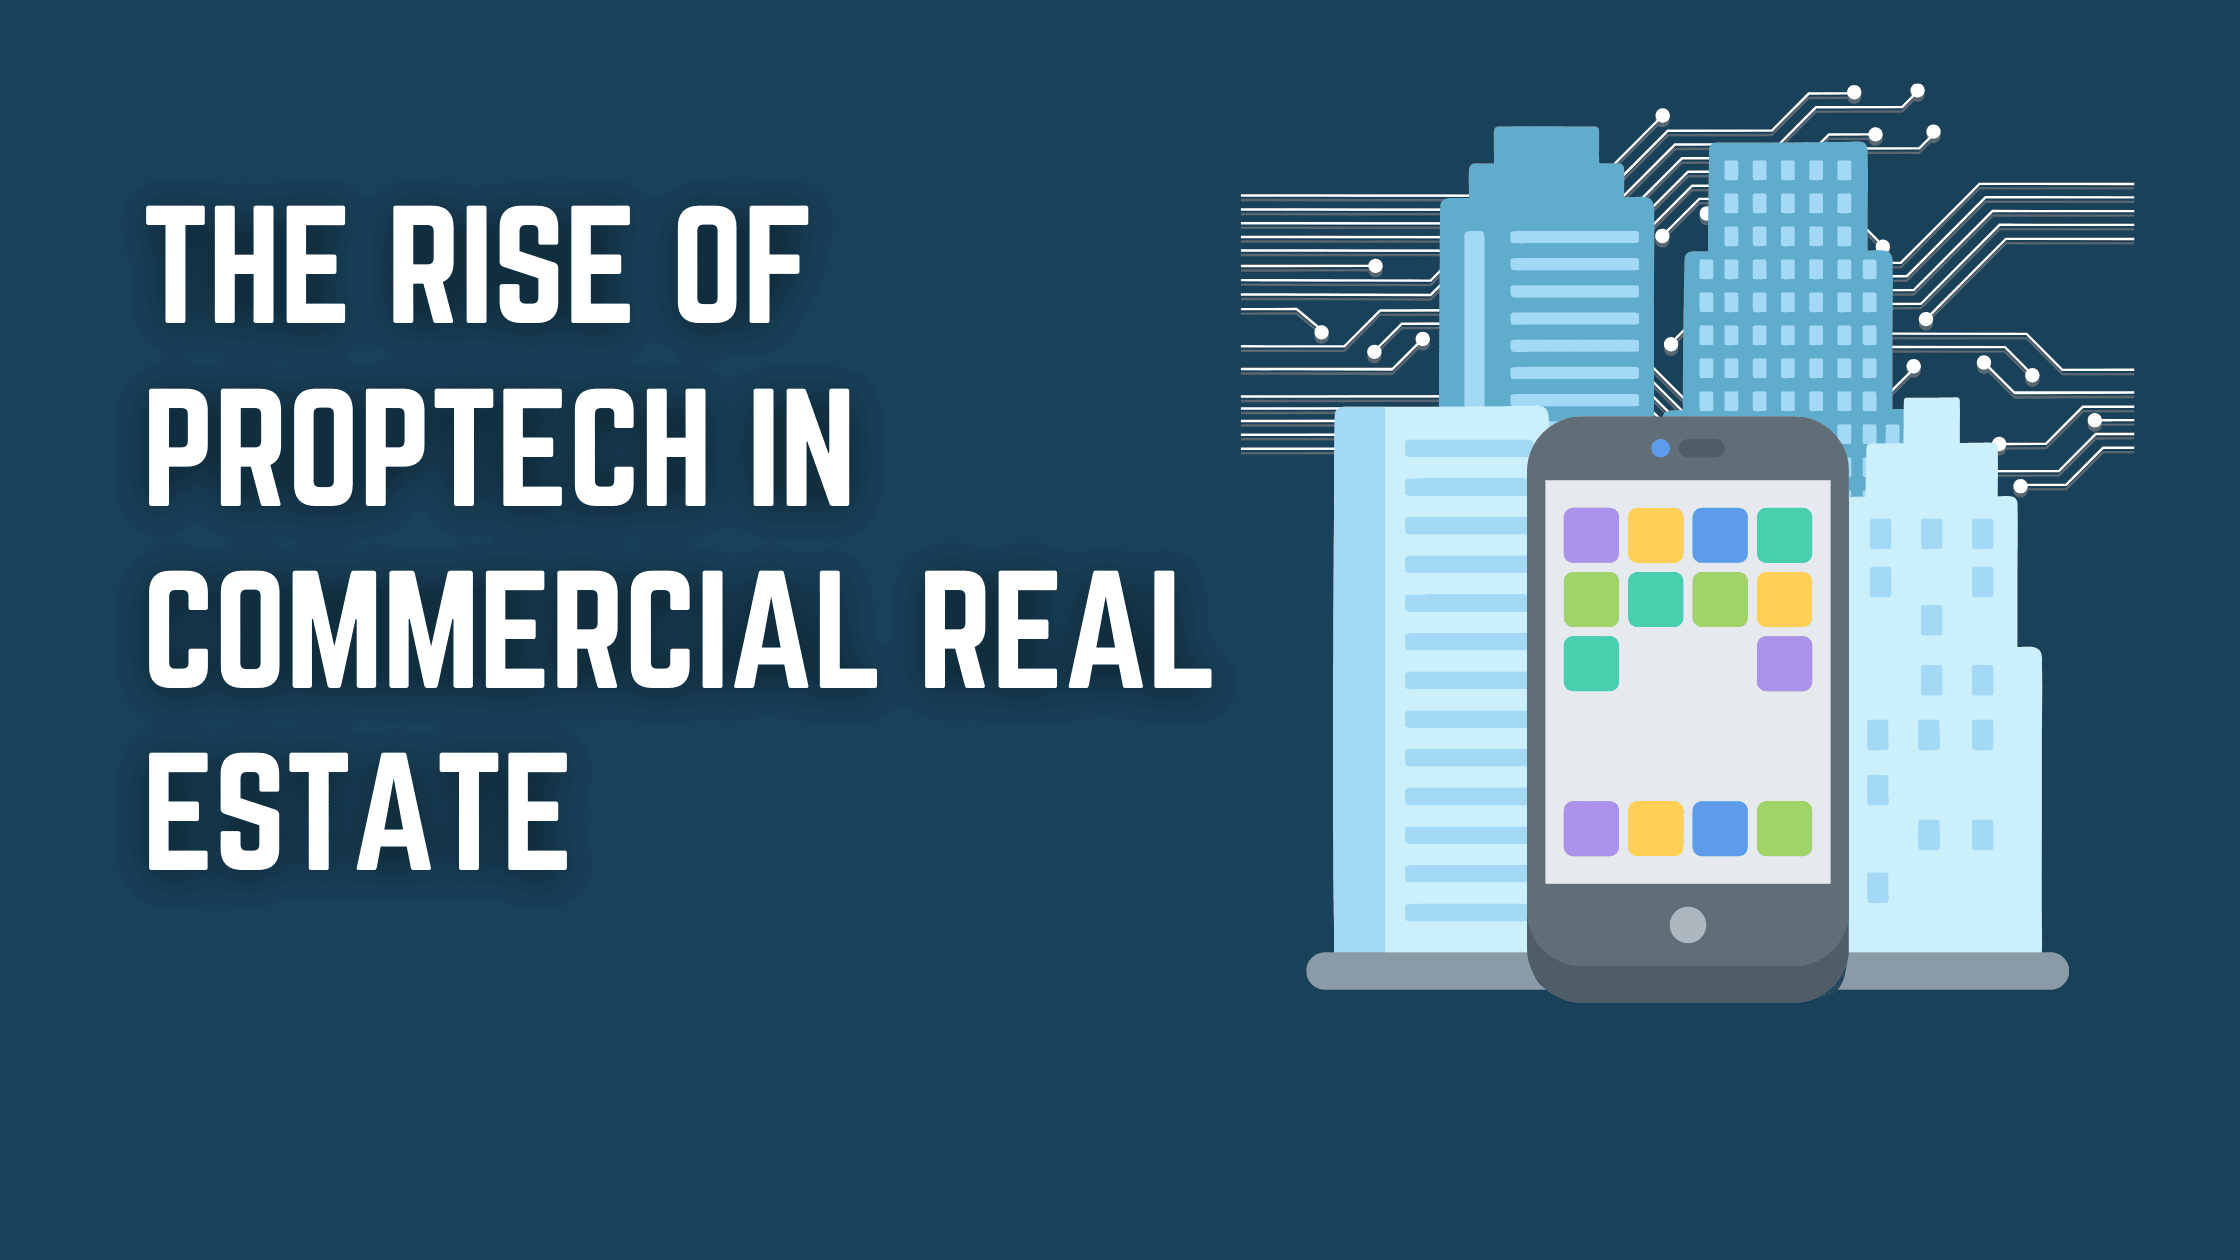 The Rise of Proptech in Commercial Real Estate